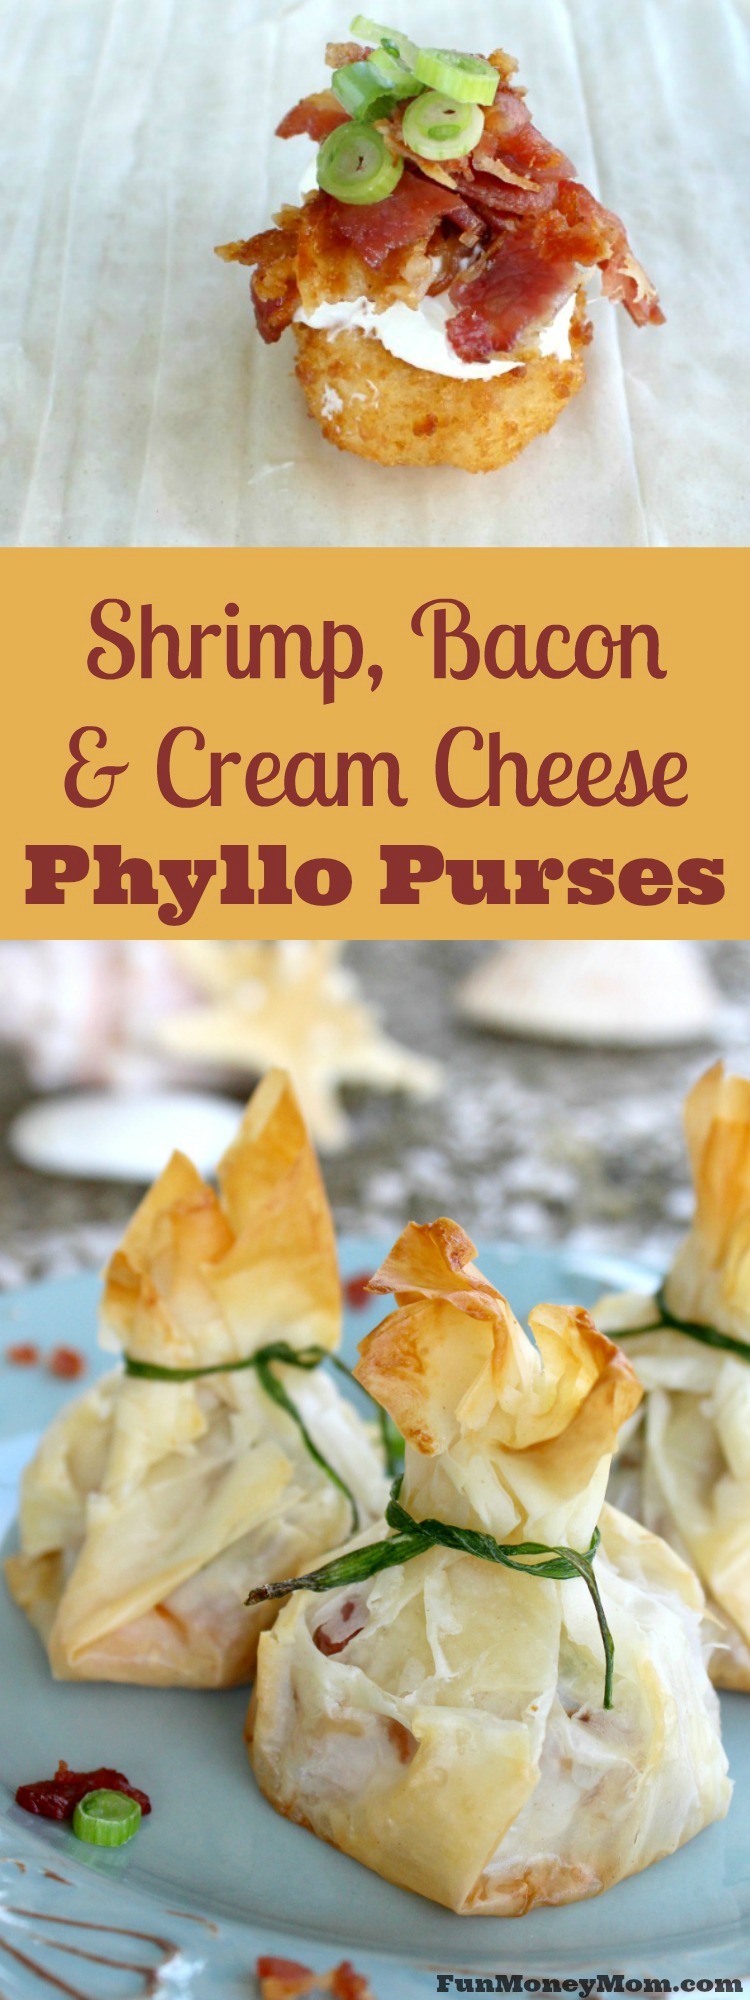 Want an amazing appetizer for your next party? These shrimp, bacon and cream cheese phyllo purses are the perfect party food!